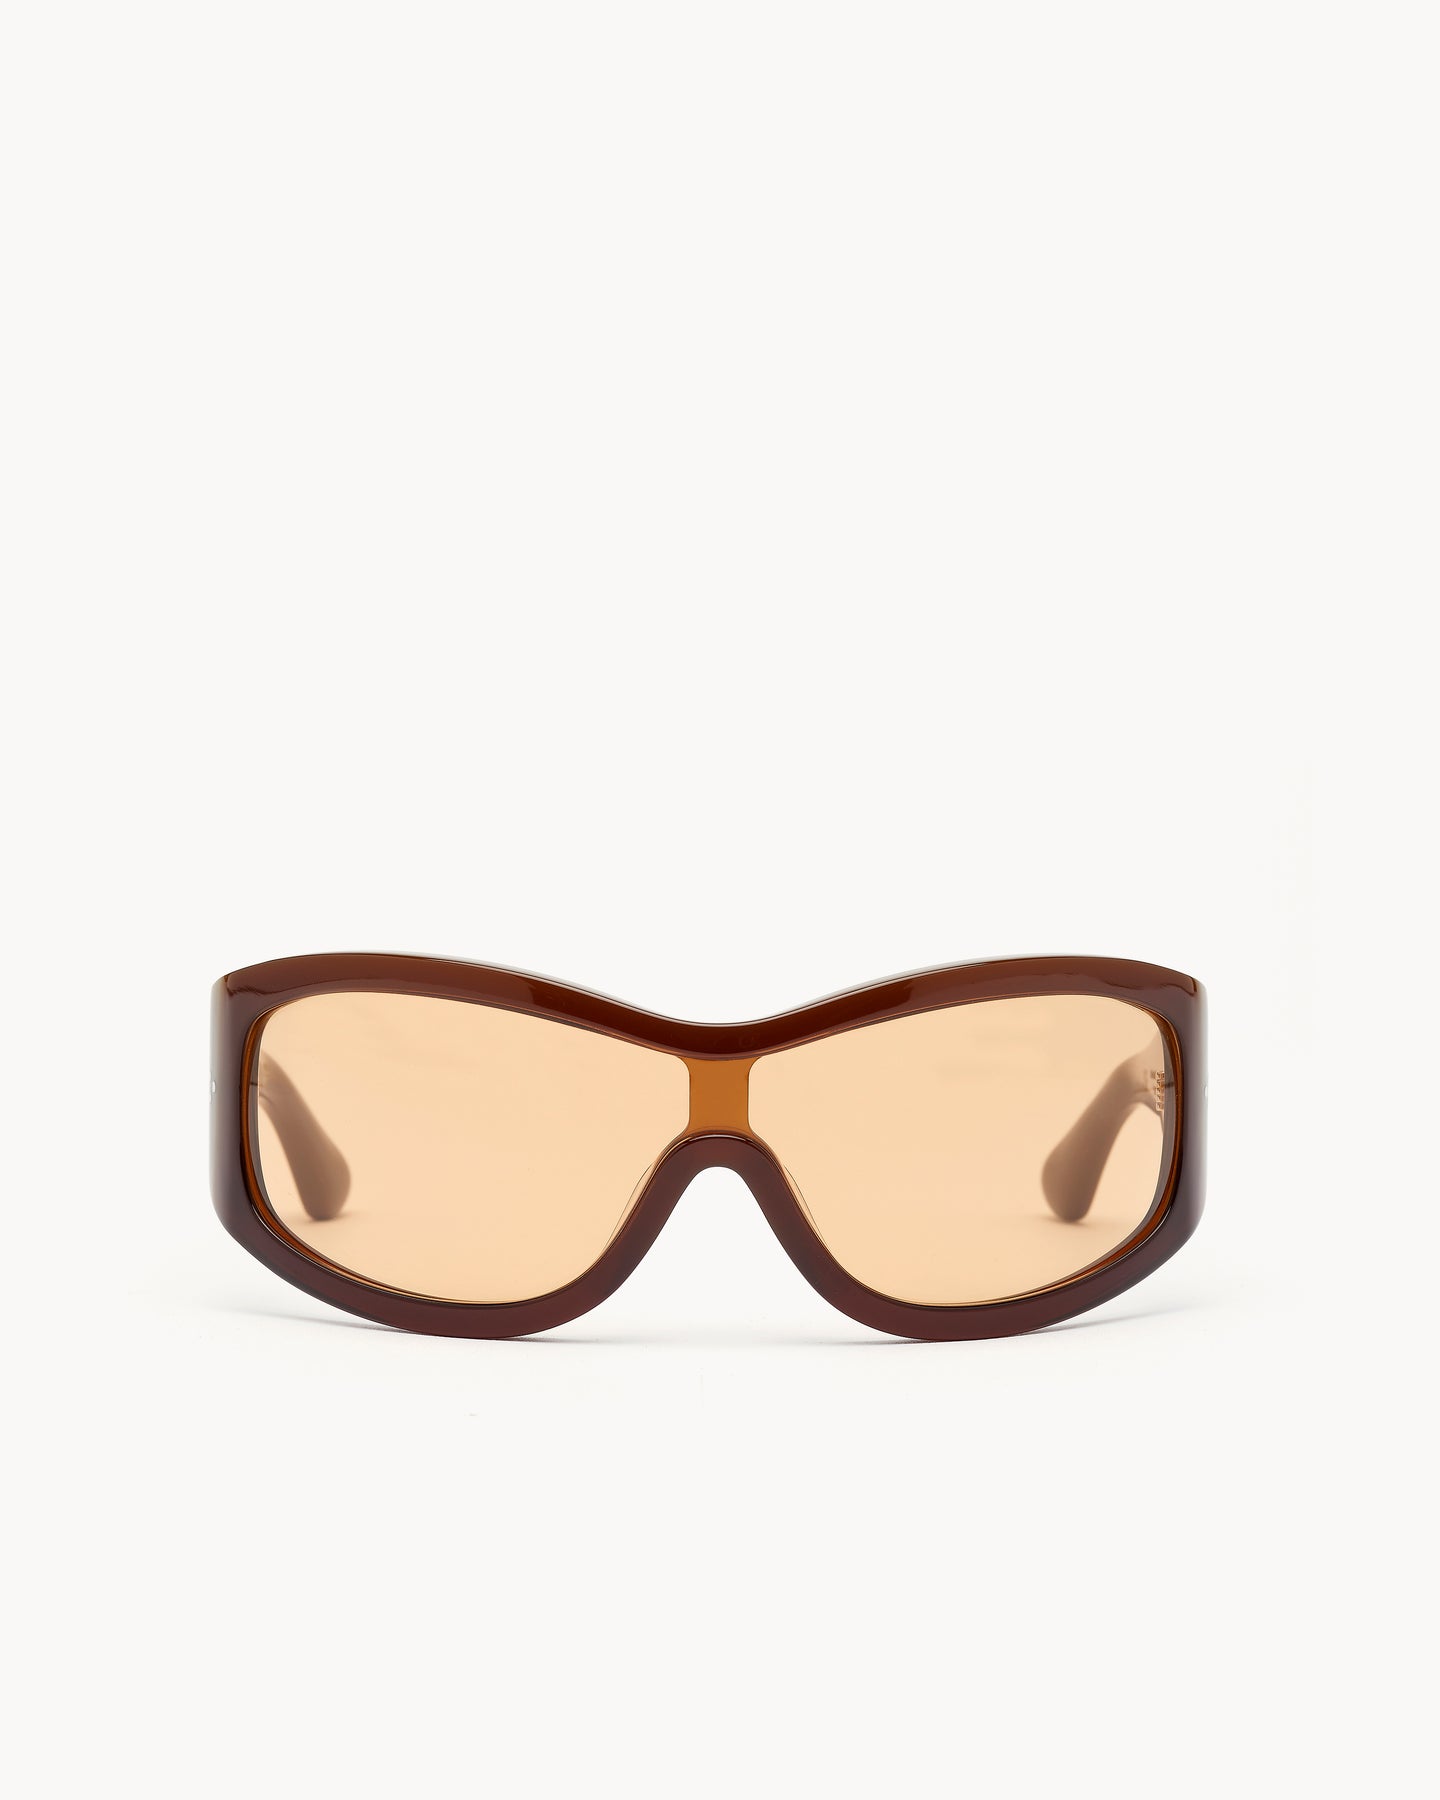 Port Tanger Nunny Sunglasses in Brown Acetate and Light Brown Lenses 1